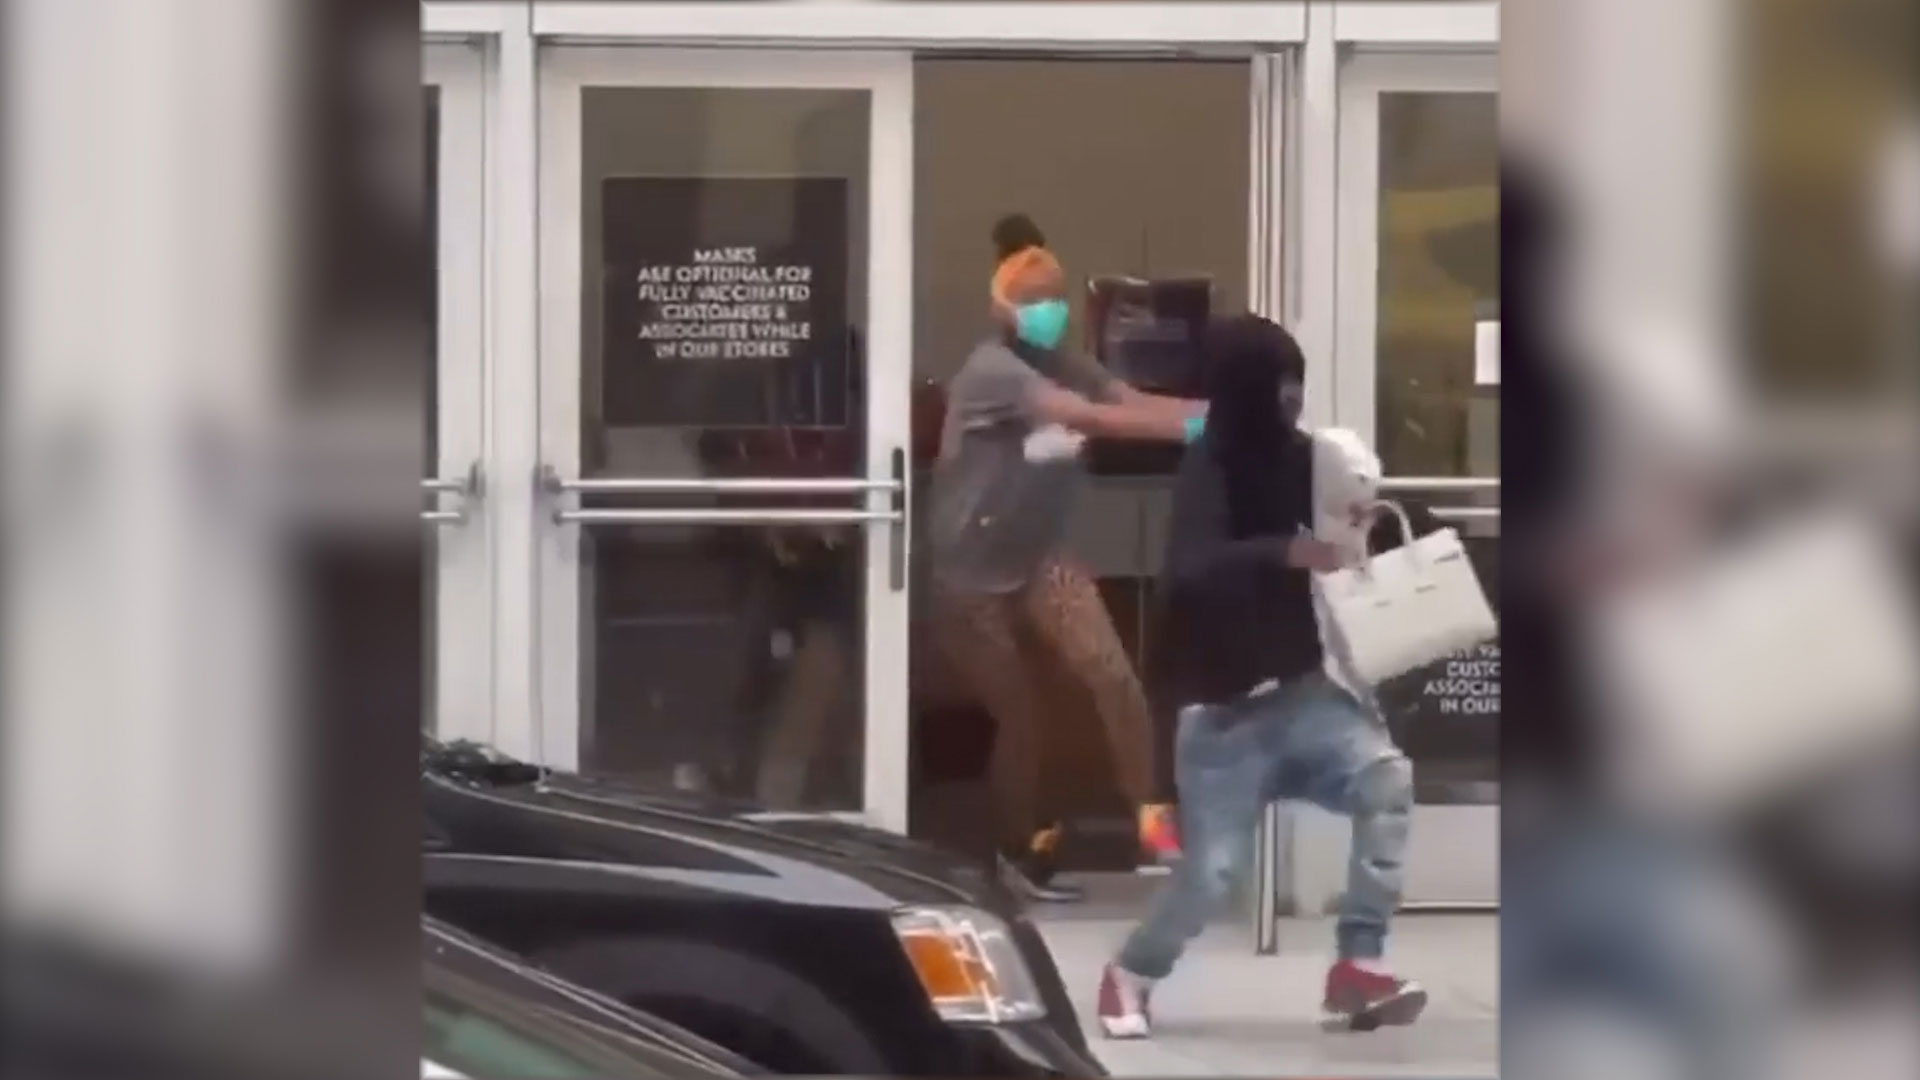 Looting in San Francisco: Retail theft sweeps Bay Area - CalMatters